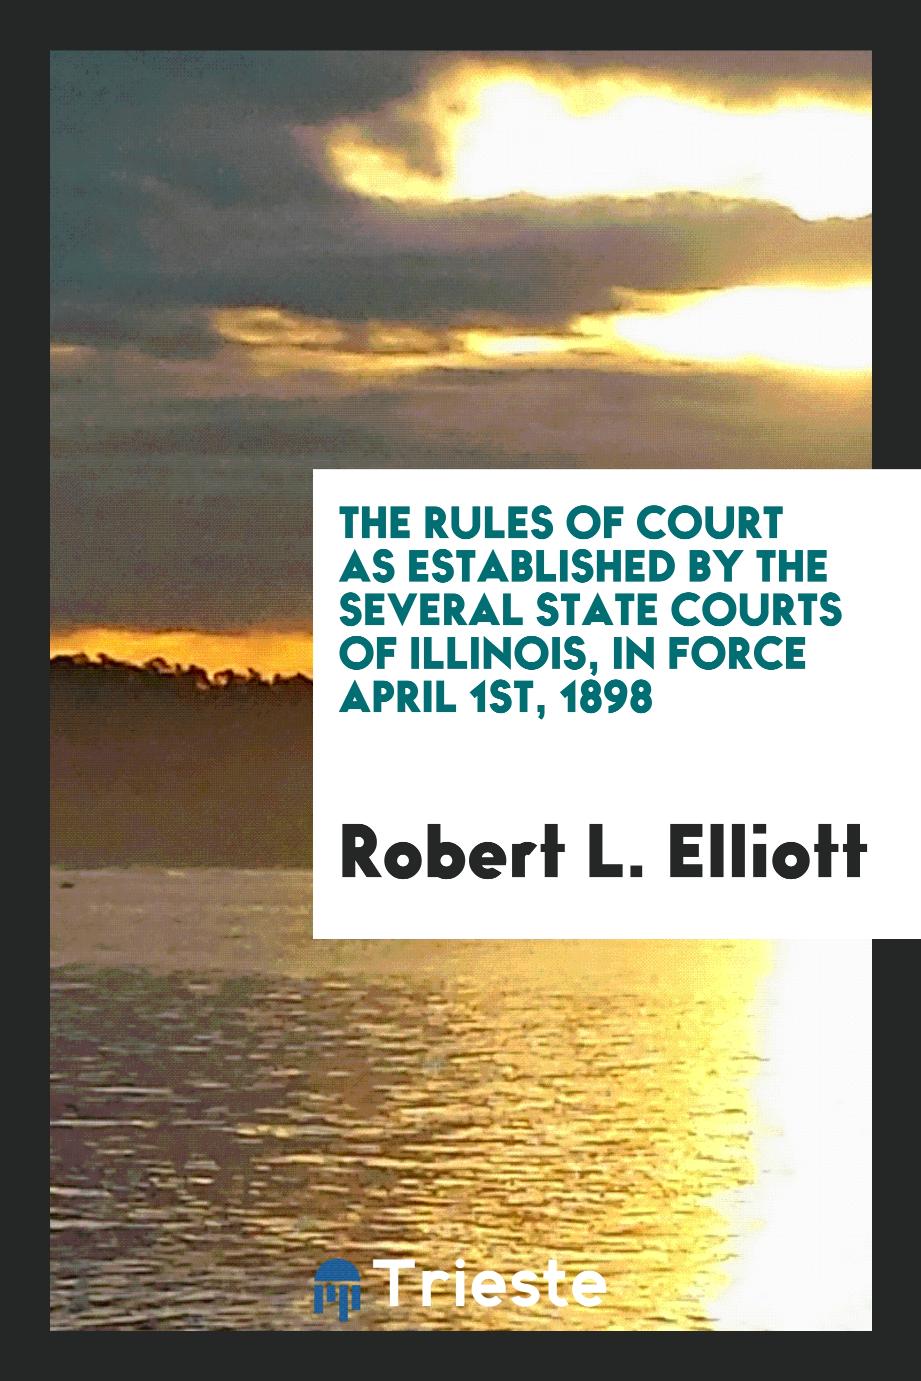 The Rules of Court as Established by the Several State Courts of Illinois, in Force April 1st, 1898